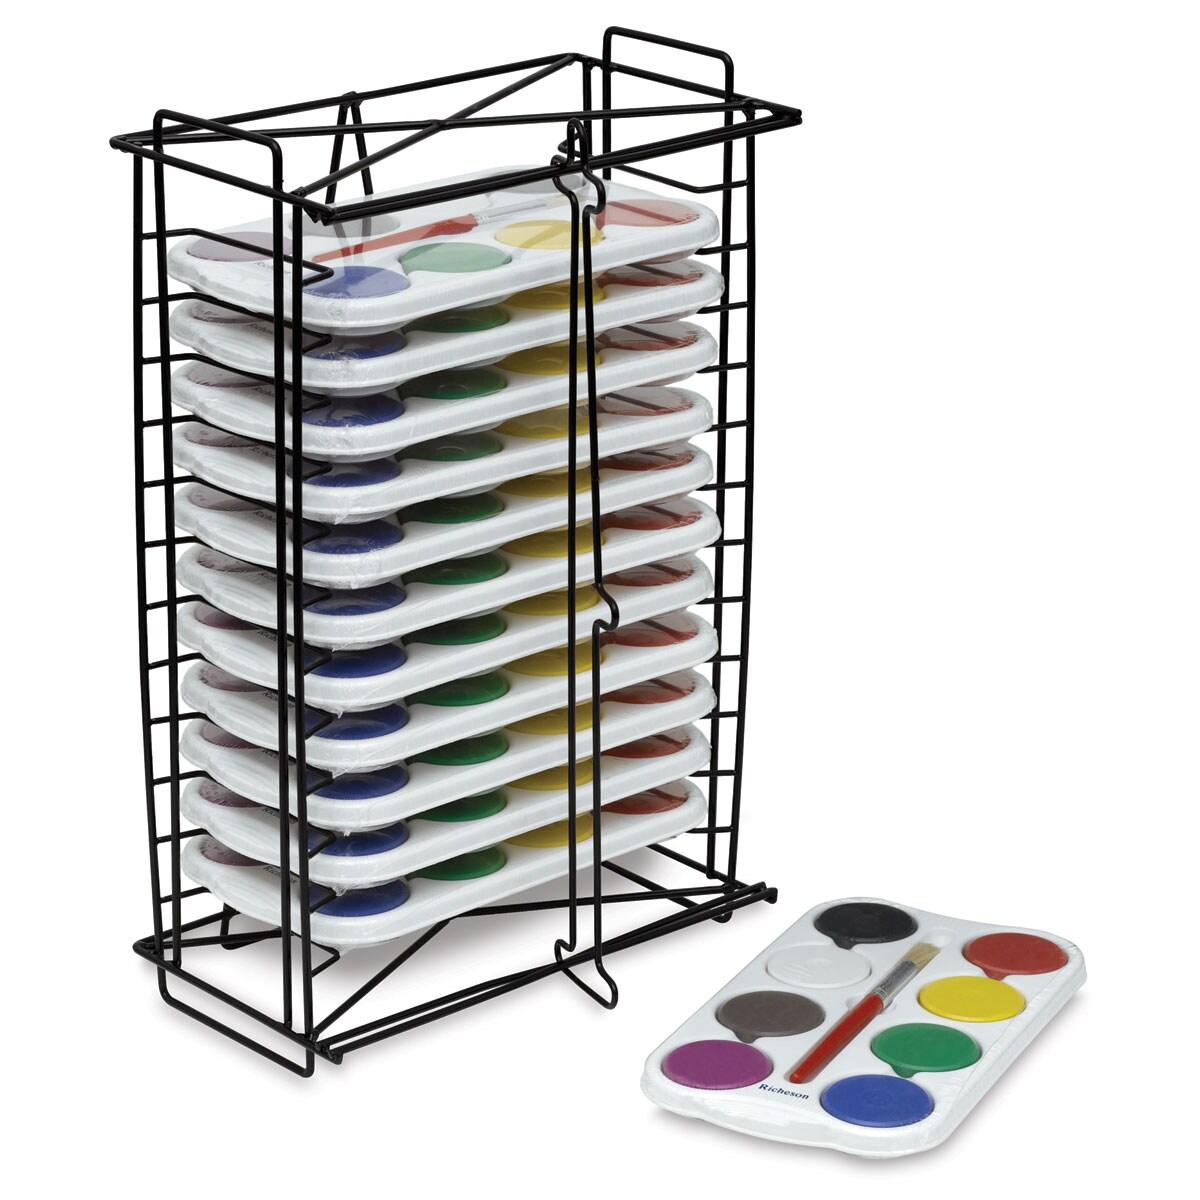 Richeson Tempera Cakes and Sets - 12 Tier Tempera Rack with 12, 8-Color Sets